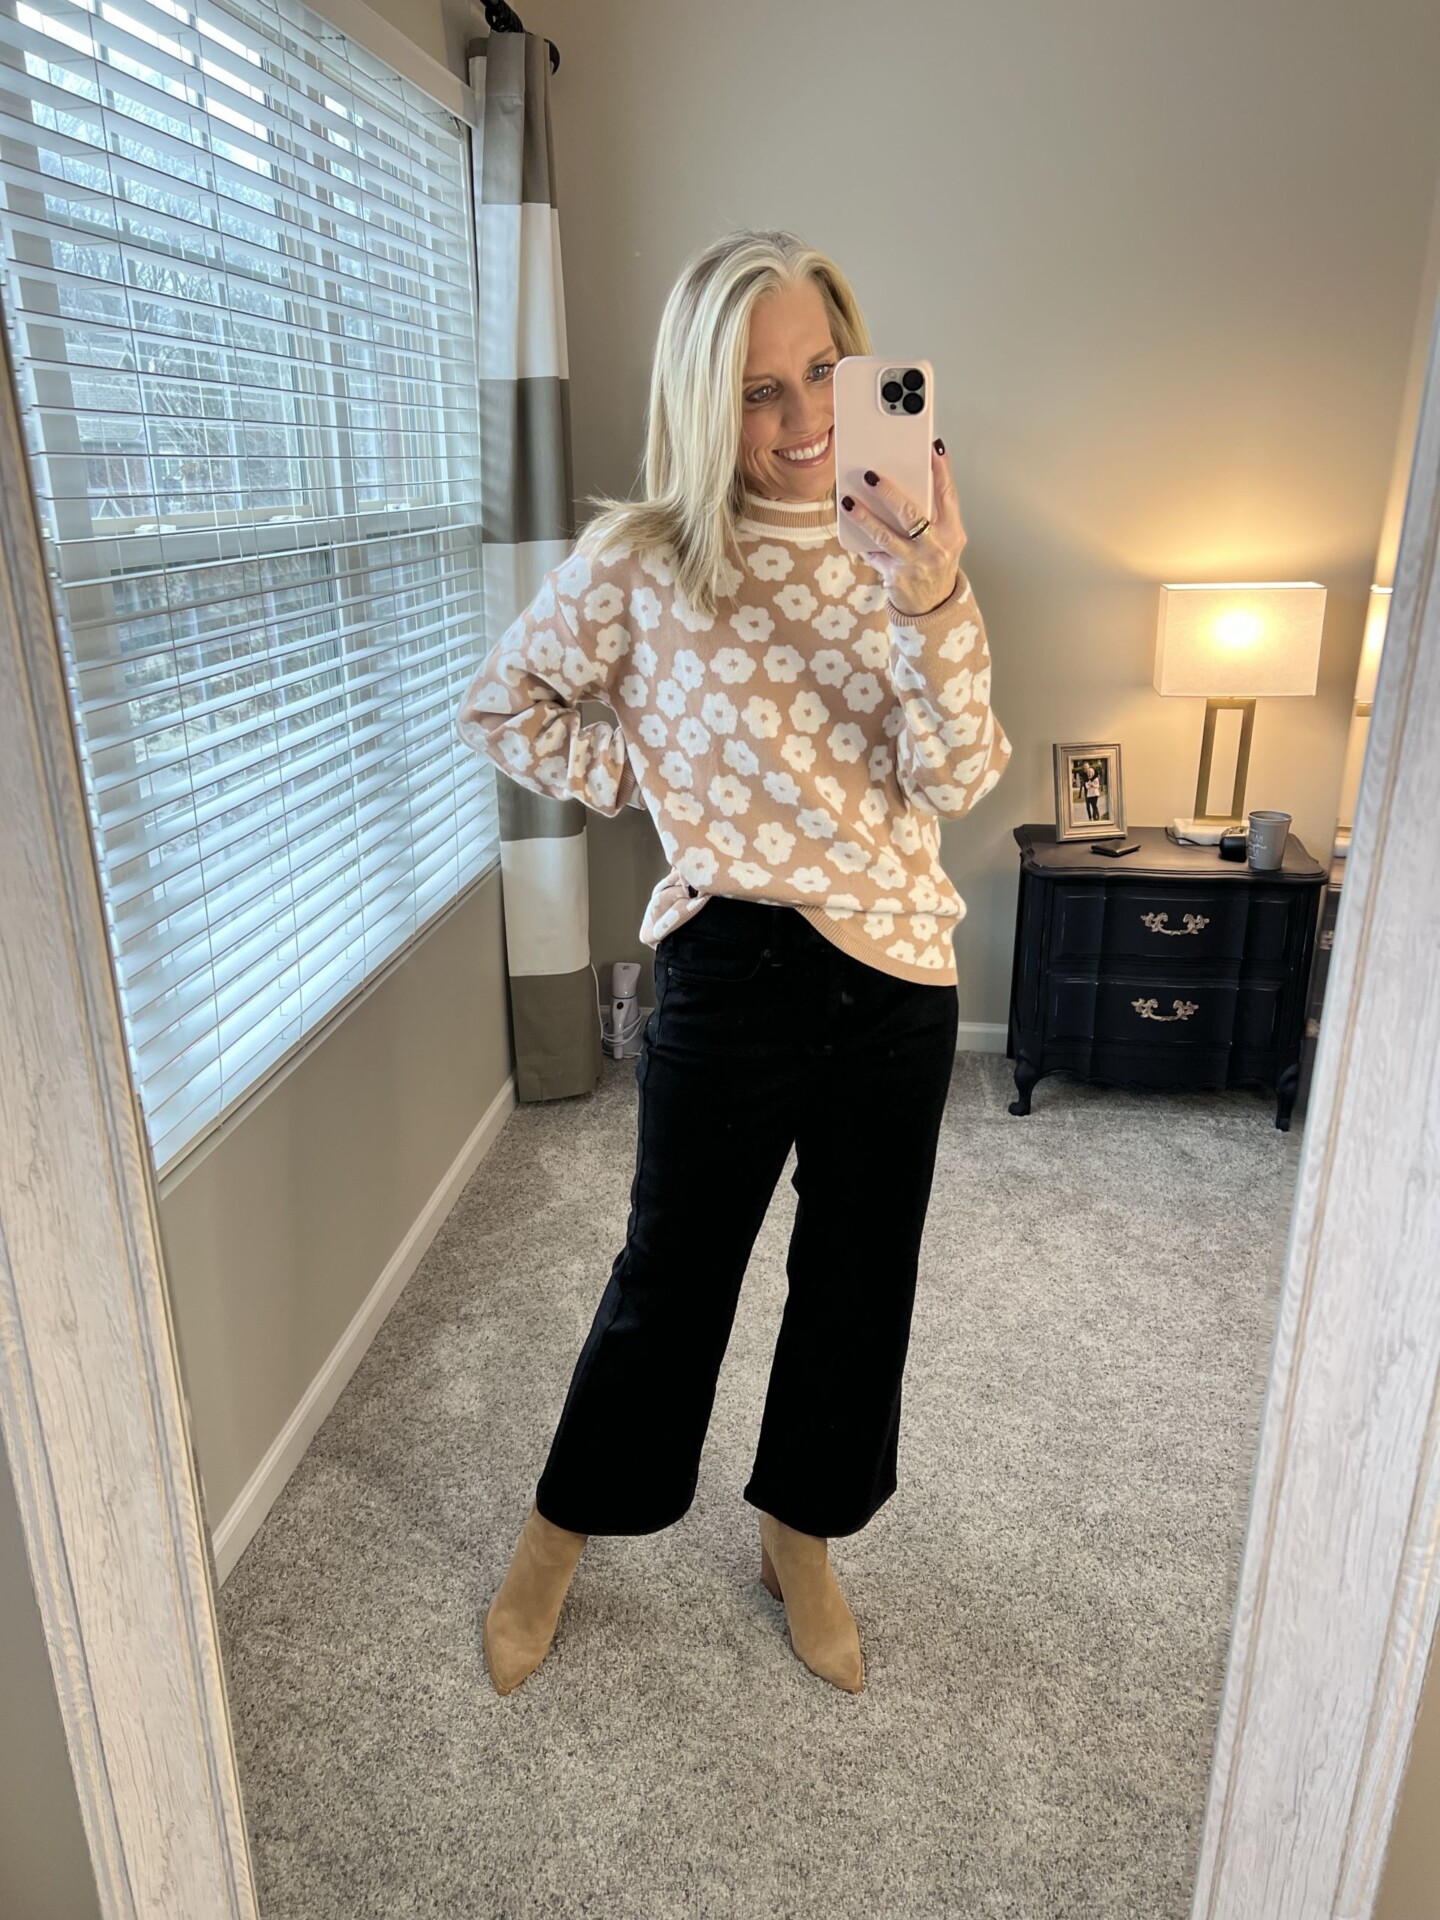 Floral Amazon sweater